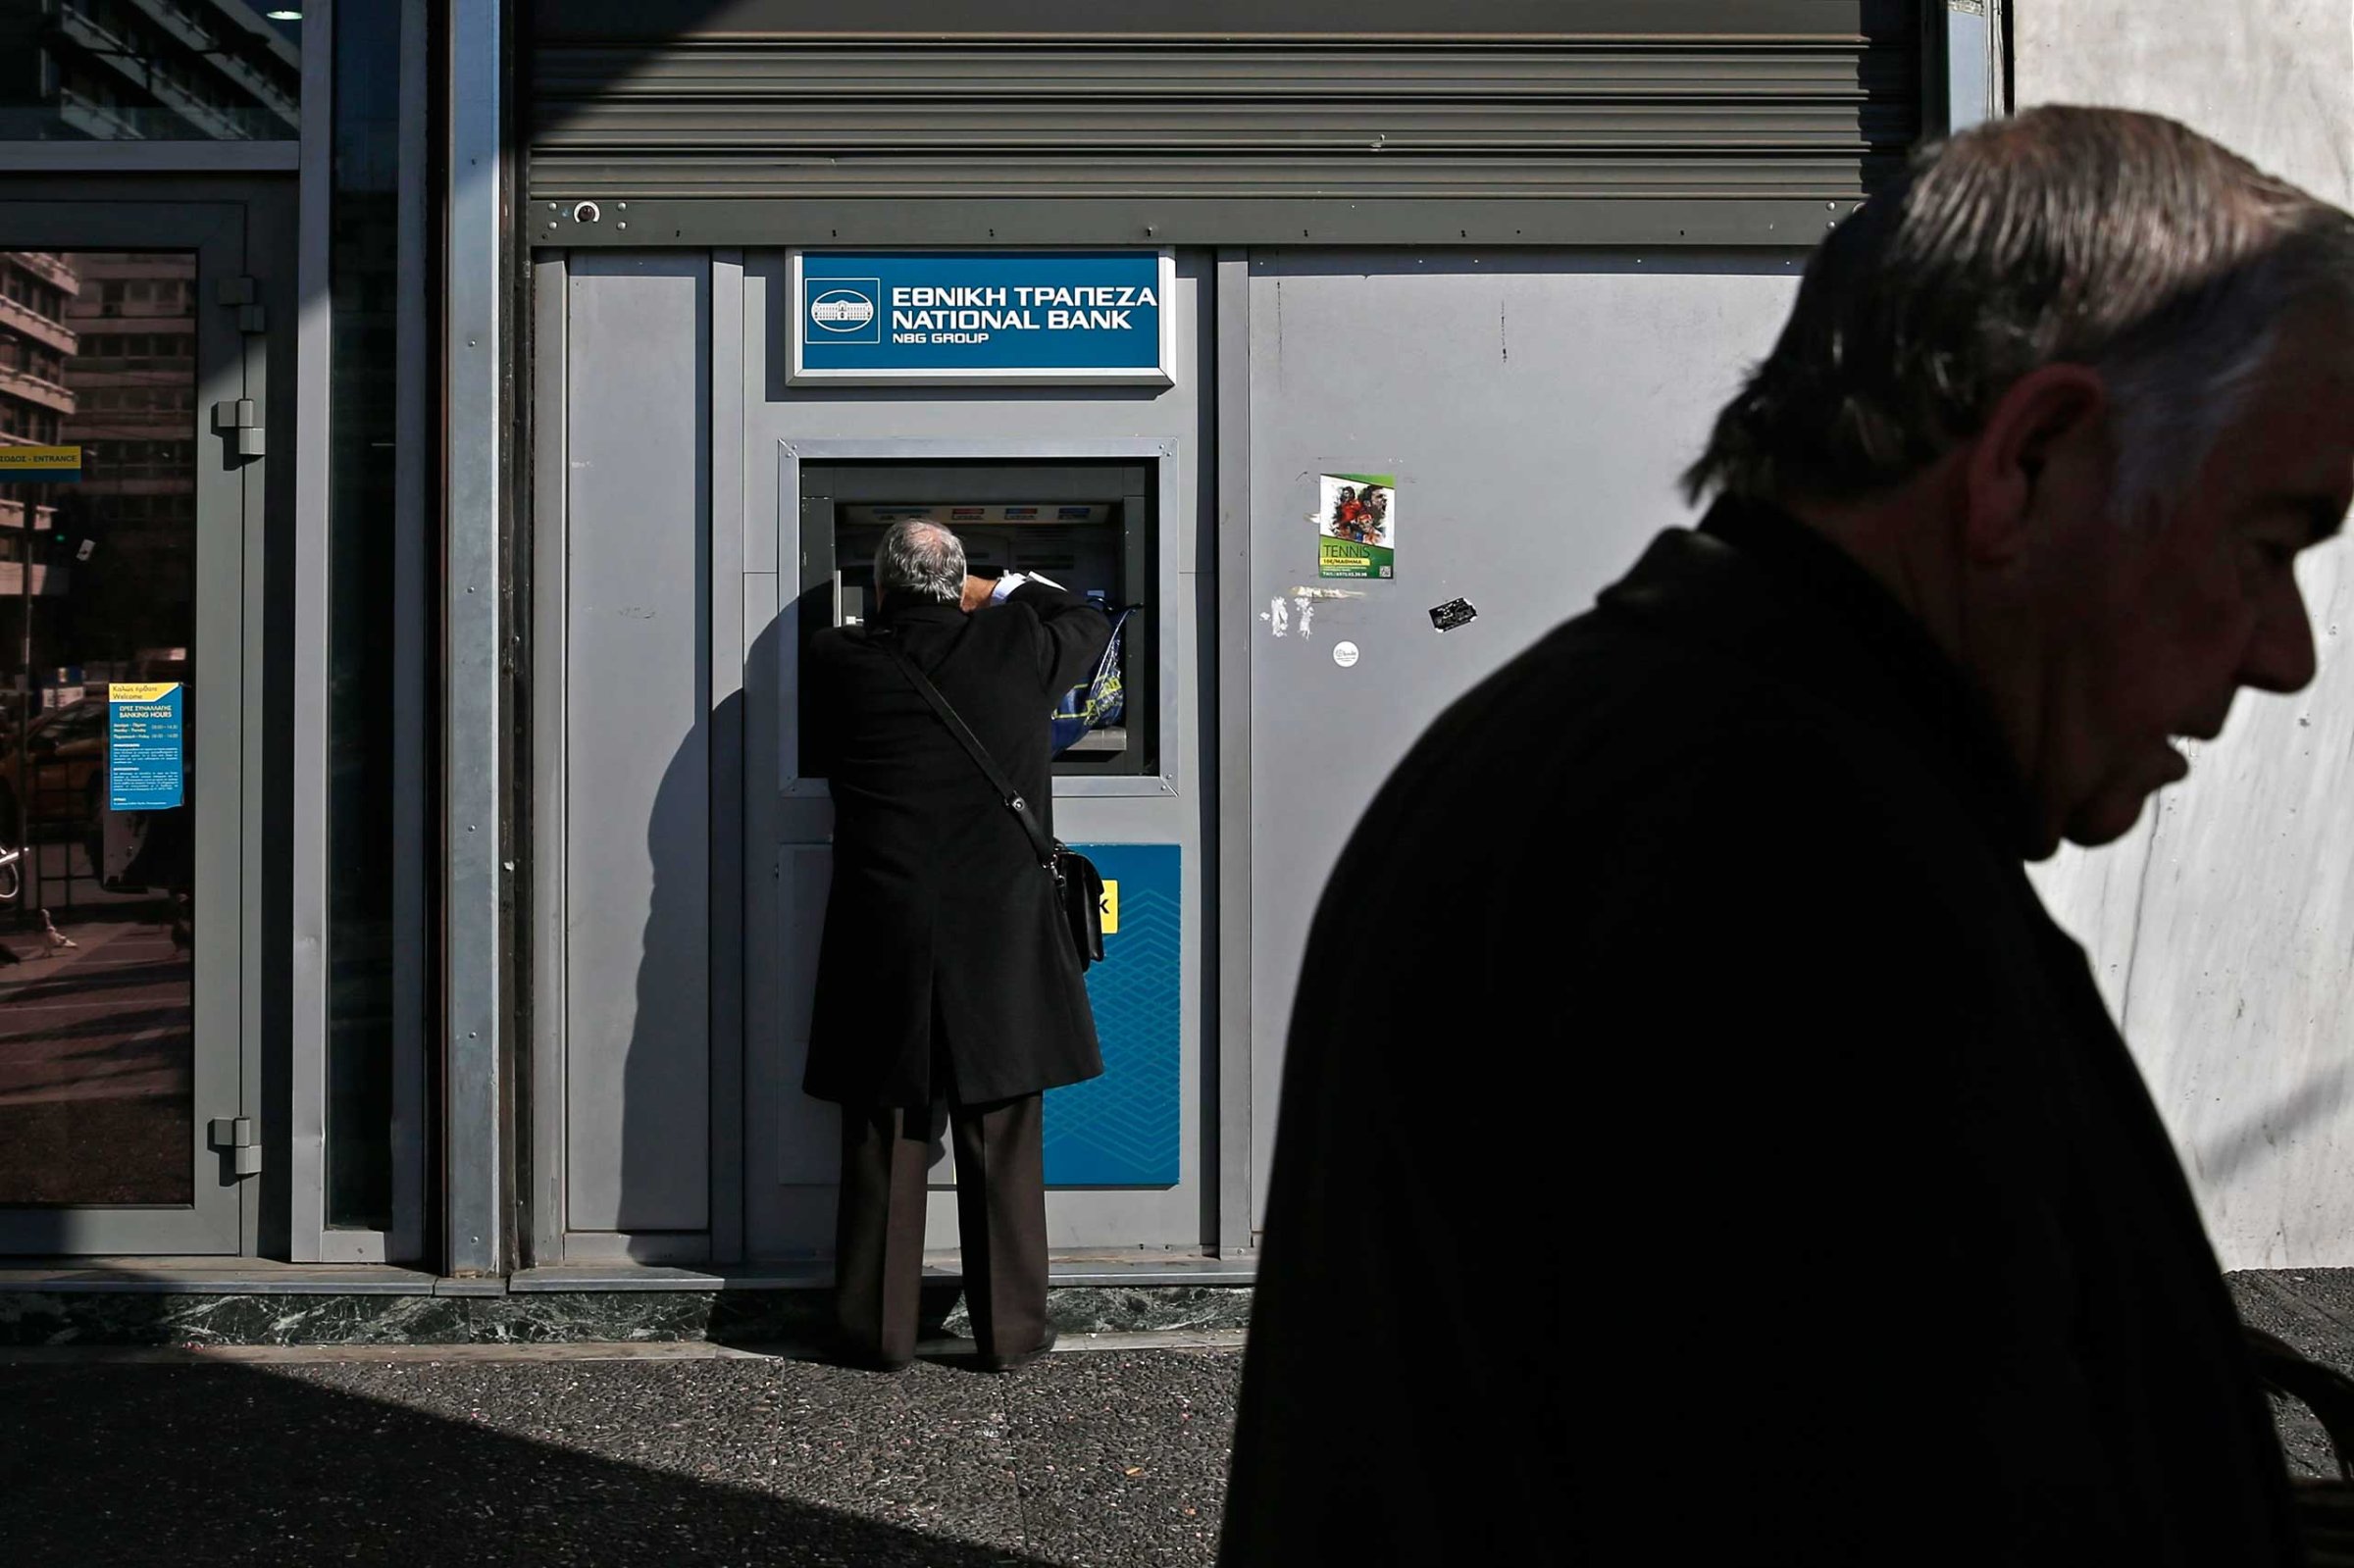 A man makes a transaction at an ATM outside a National Bank of Greece branch in Athens, Feb. 19, 2015.